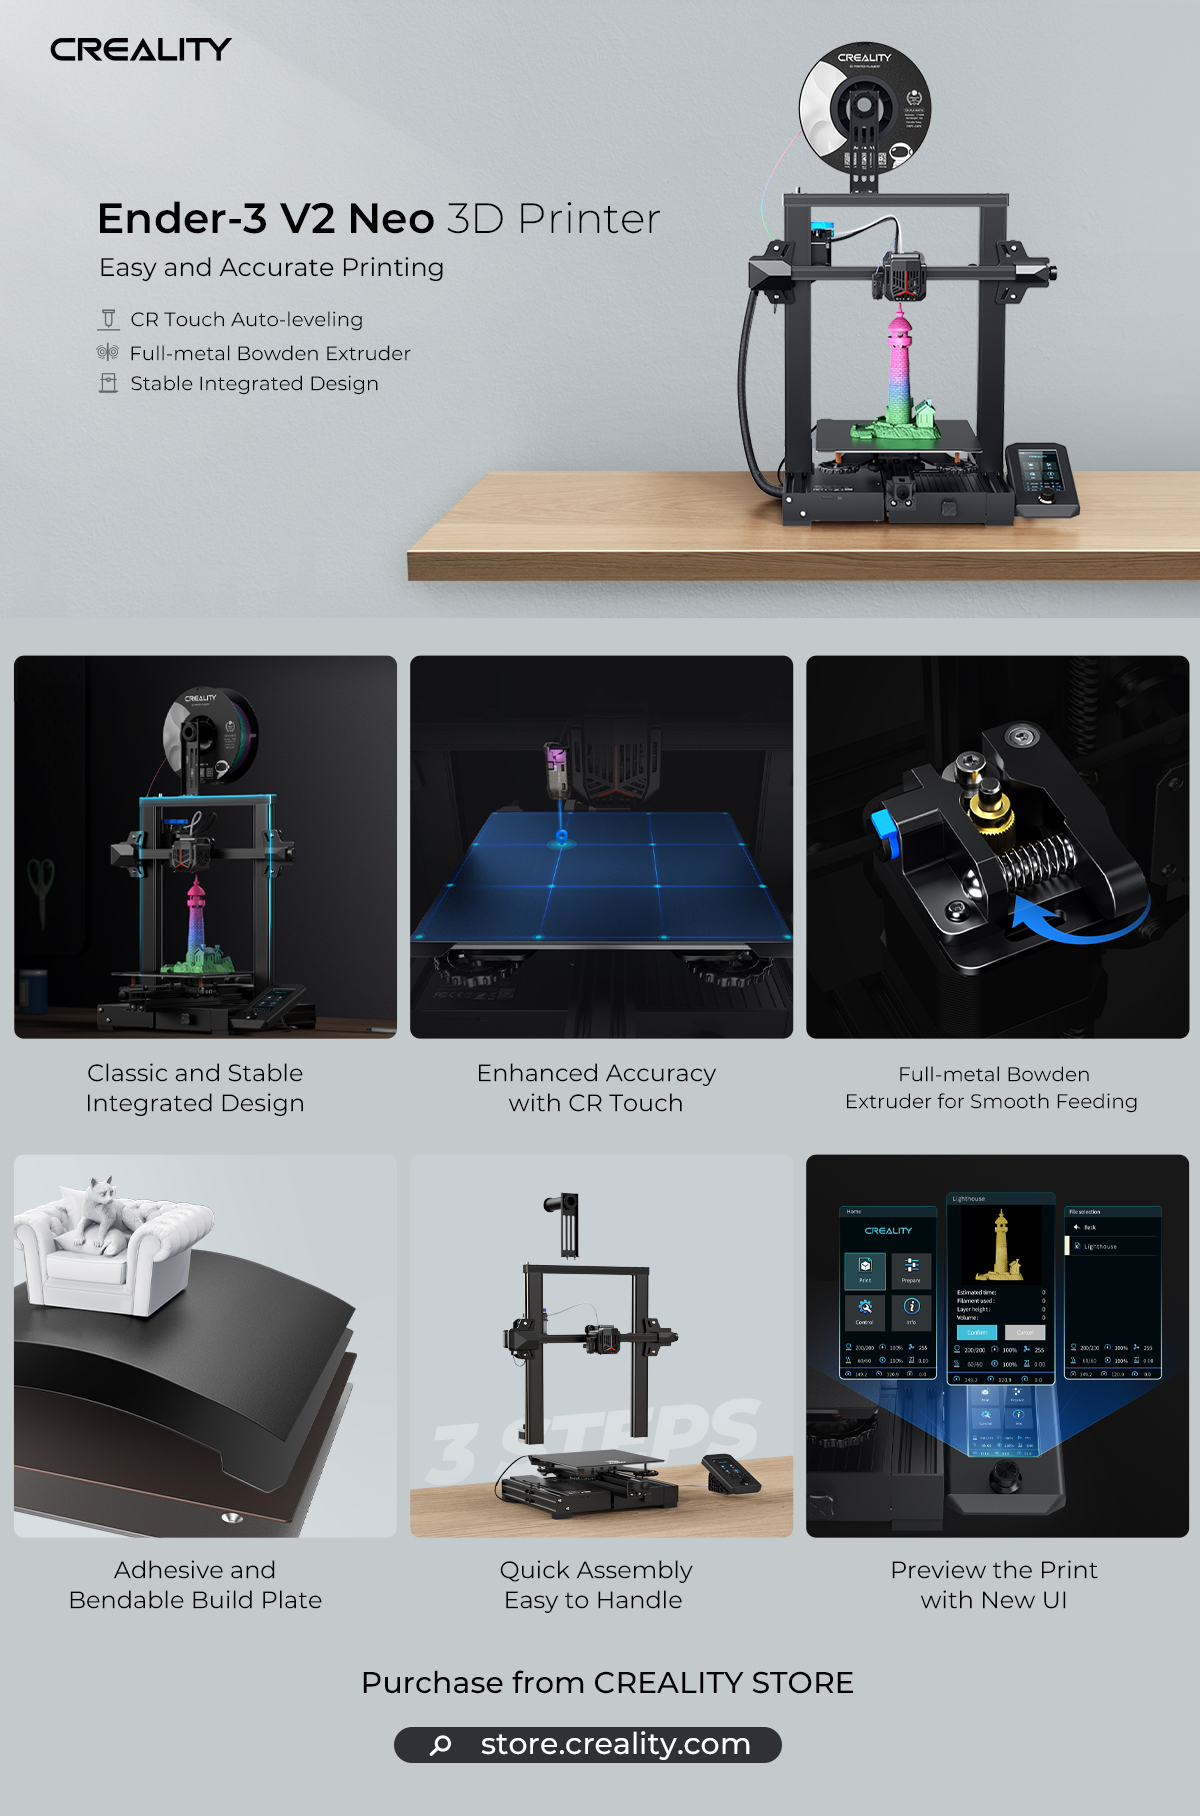 Ender 3 V2 Neo | Ender-3 Neo, Ender-3 V2 Neo, and Ender-3 Max Neo, which is the right one for you?